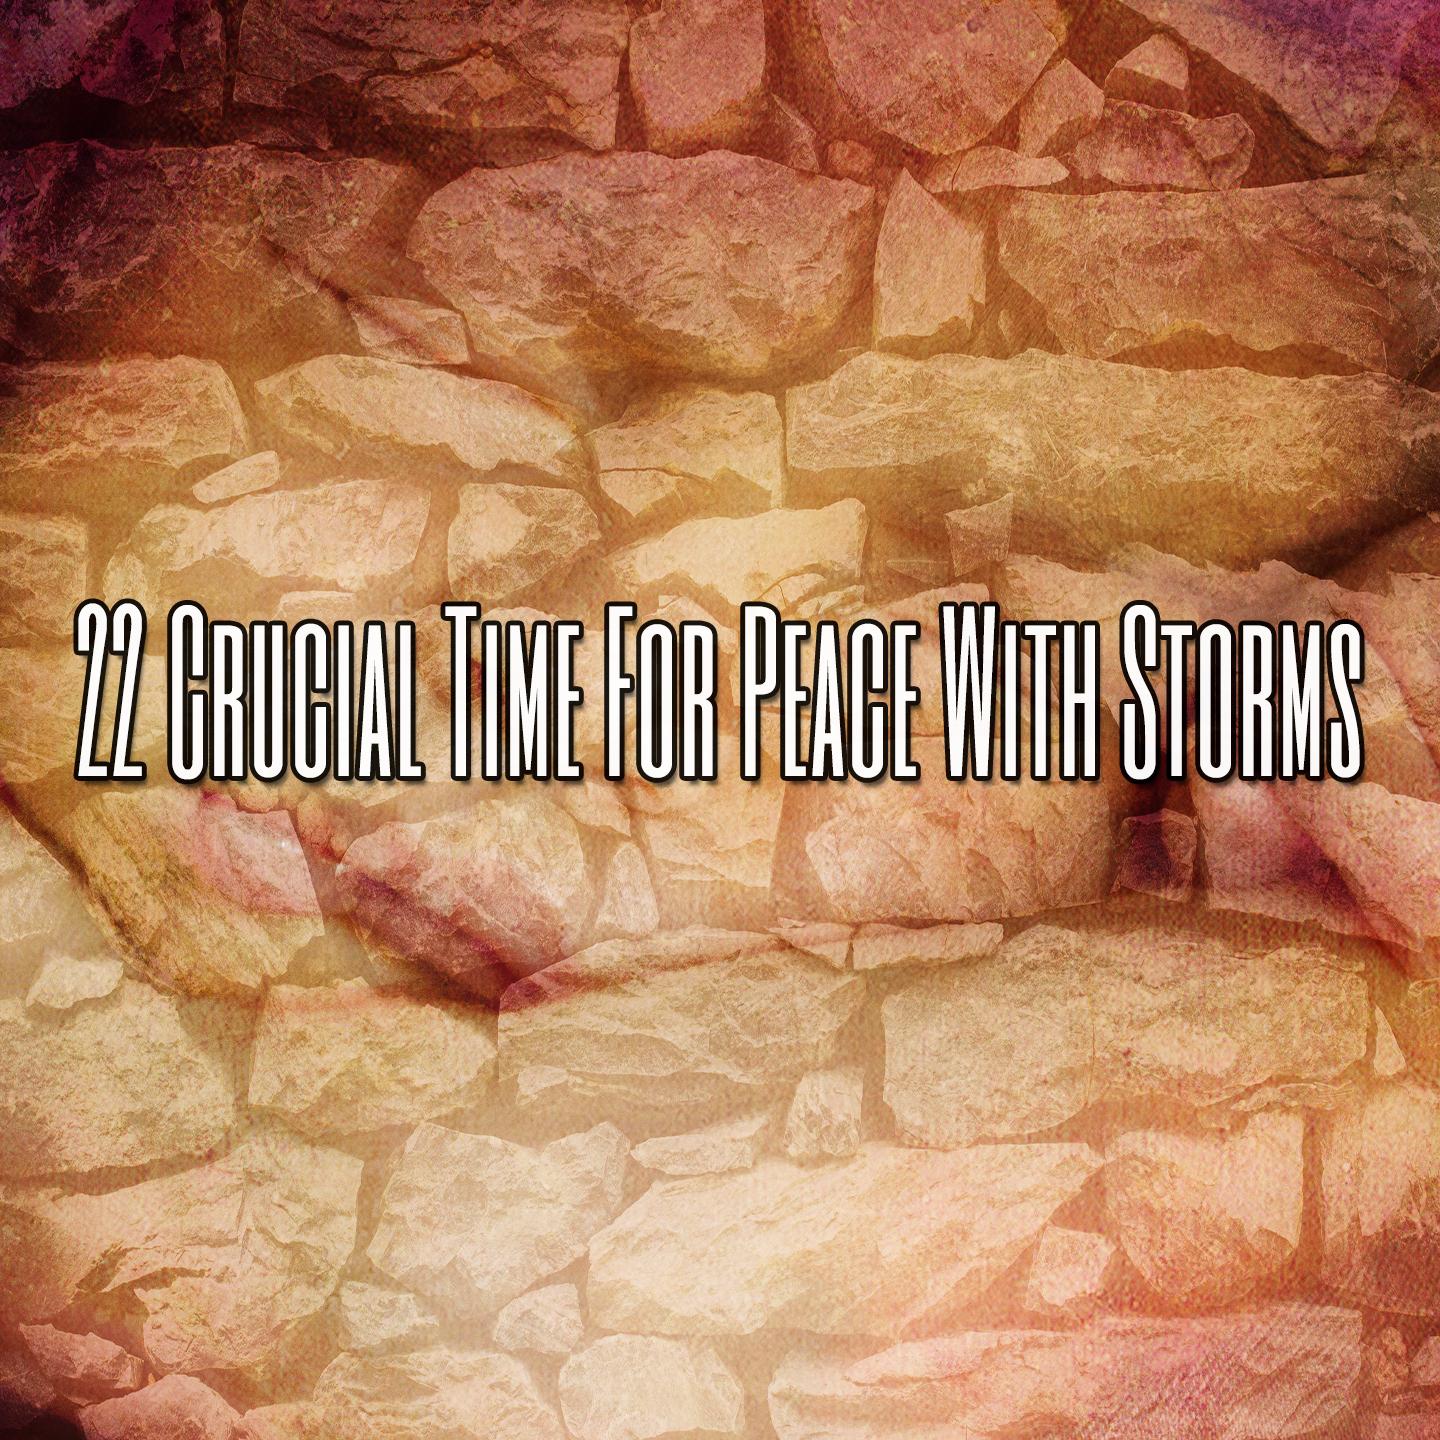 22 Crucial Time for Peace with Storms